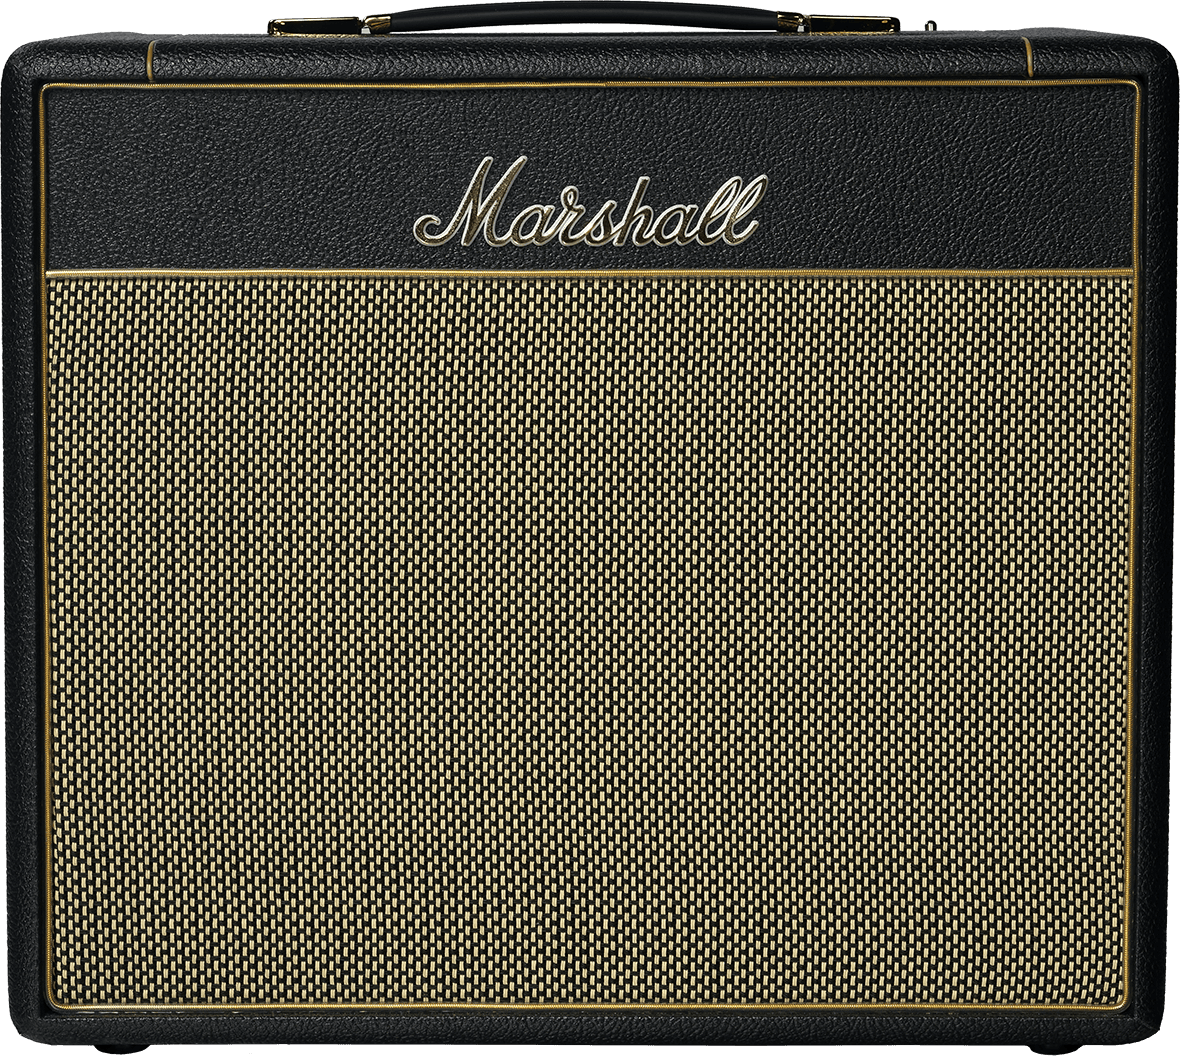 Marshall Studio Vintage Combo 20w - Electric guitar combo amp - Main picture